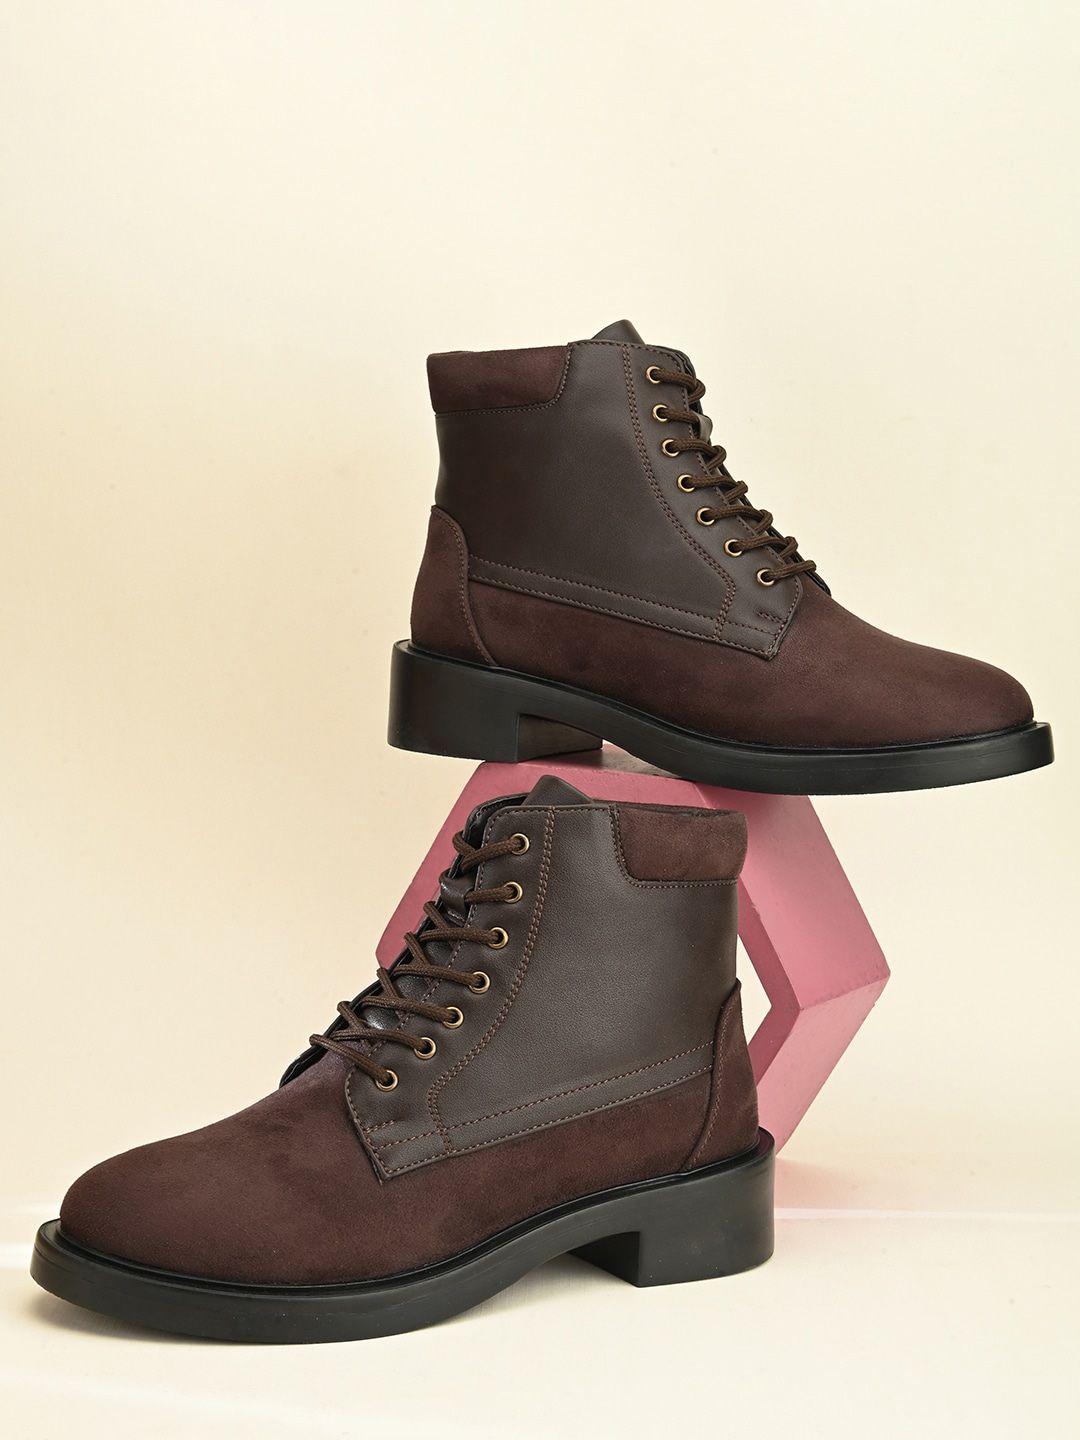 the roadster lifestyle co. women mid top block-heeled regular boots